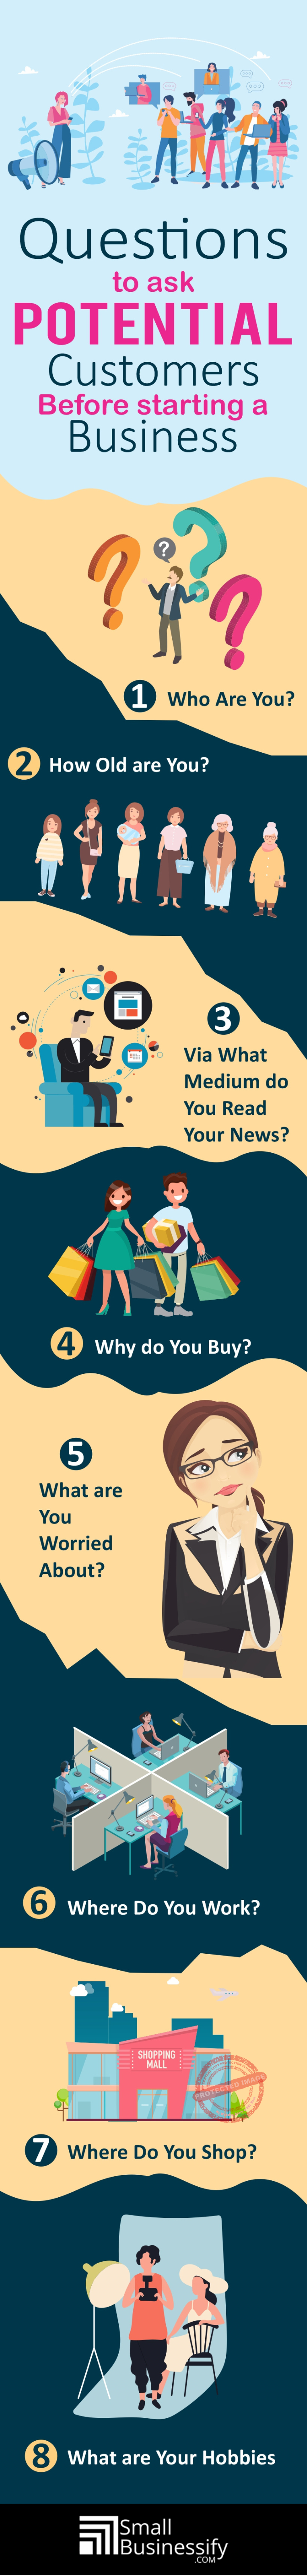 Questions to ask potential customers before starting a business infographic